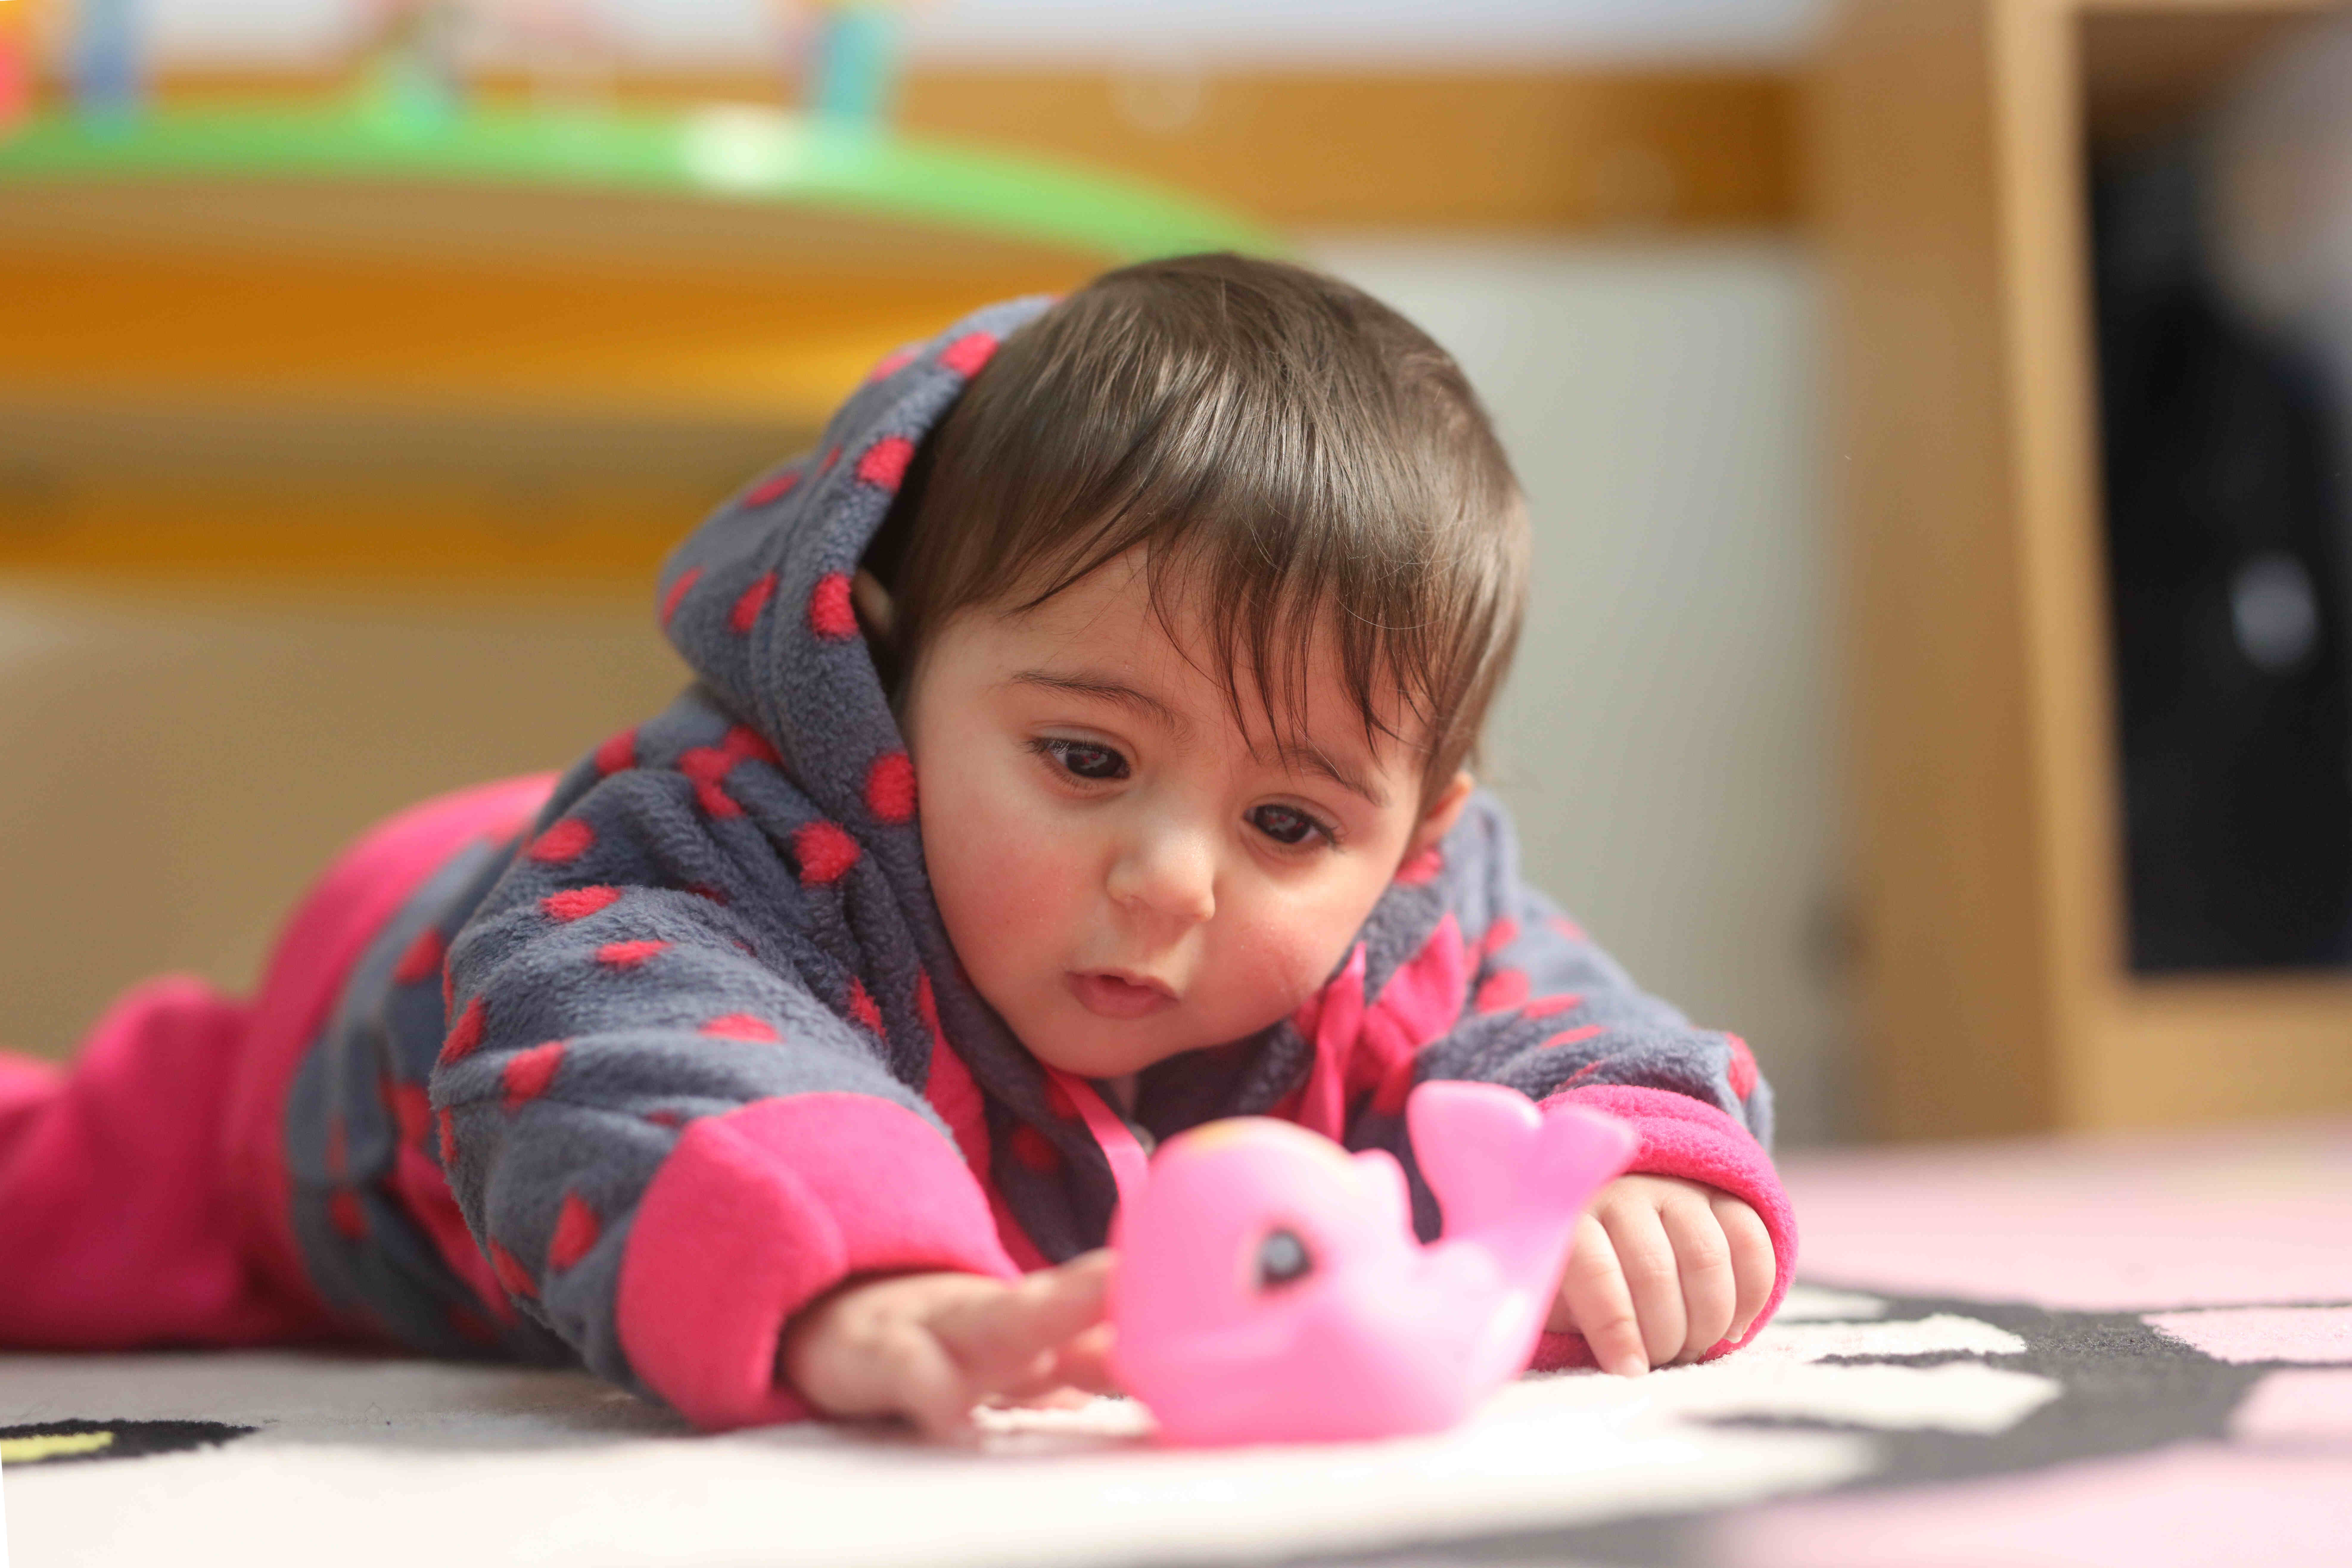 Reeam Aloush, age 18 weeks, attempts crawling in one of UNICEF's Early Childhood Development (ECD) centres in the Sheikh Radwan district, Gaza City, State of Palestine, 22 January 2019. The socio-economic and humanitarian situation in Gaza is dire for children, resulting in increased vulnerabilities and negative coping strategies such as child labour and early marriage. Restrictions on the movement of people and goods into and out of Gaza are negatively affecting trade, employment and supply of services.